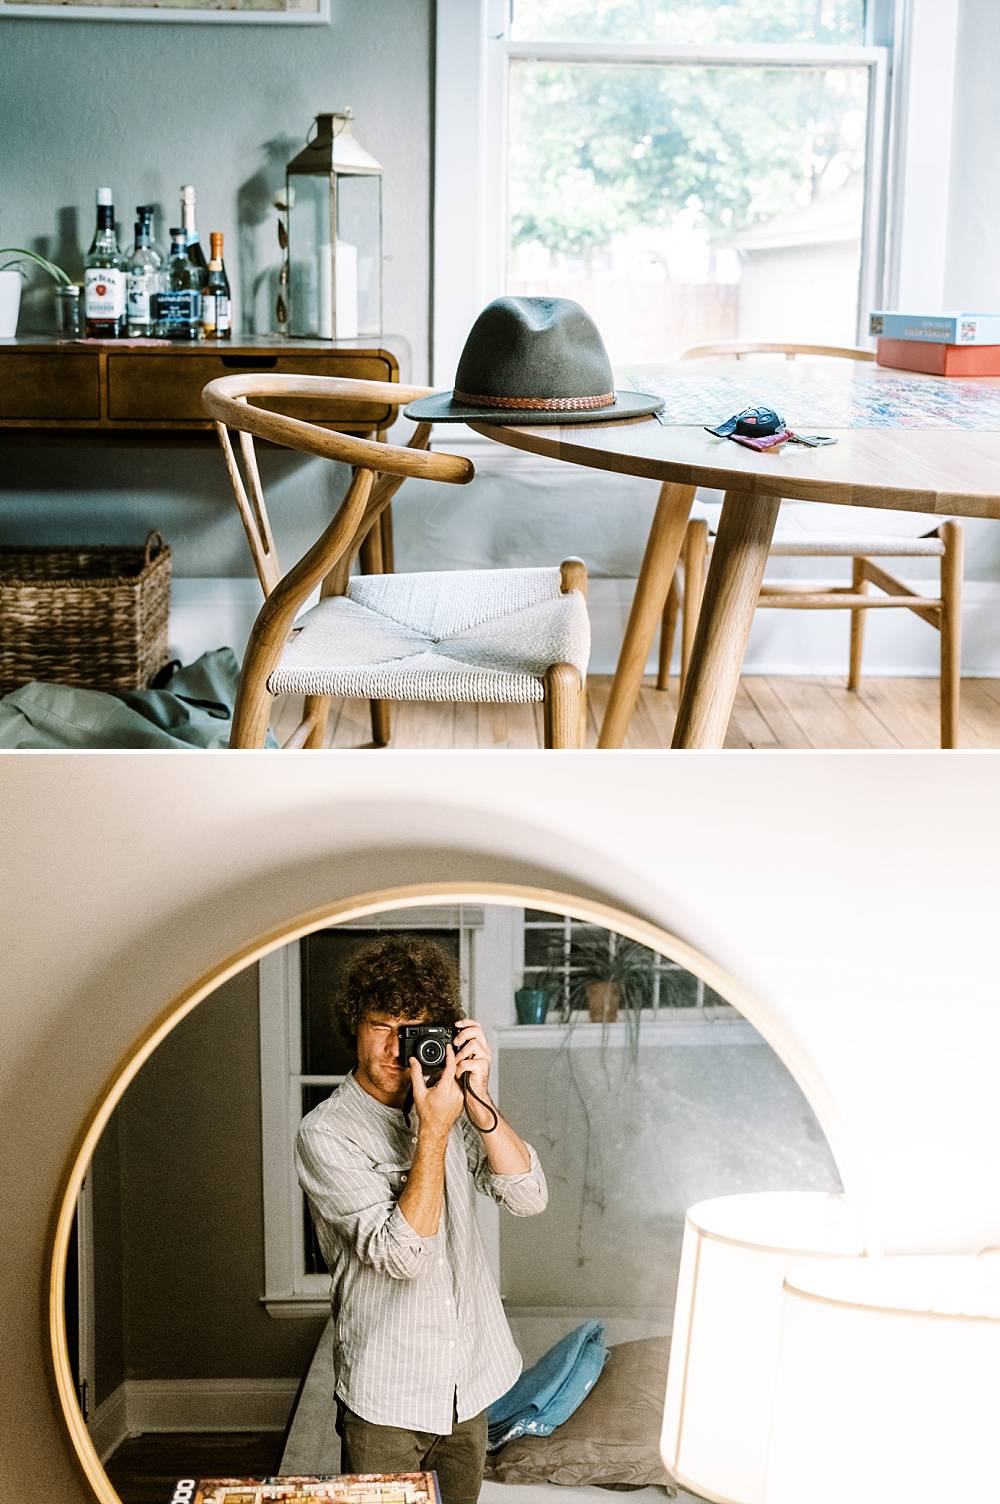 self portrait on fuji x100v by brian d smith photography in circular target mirror